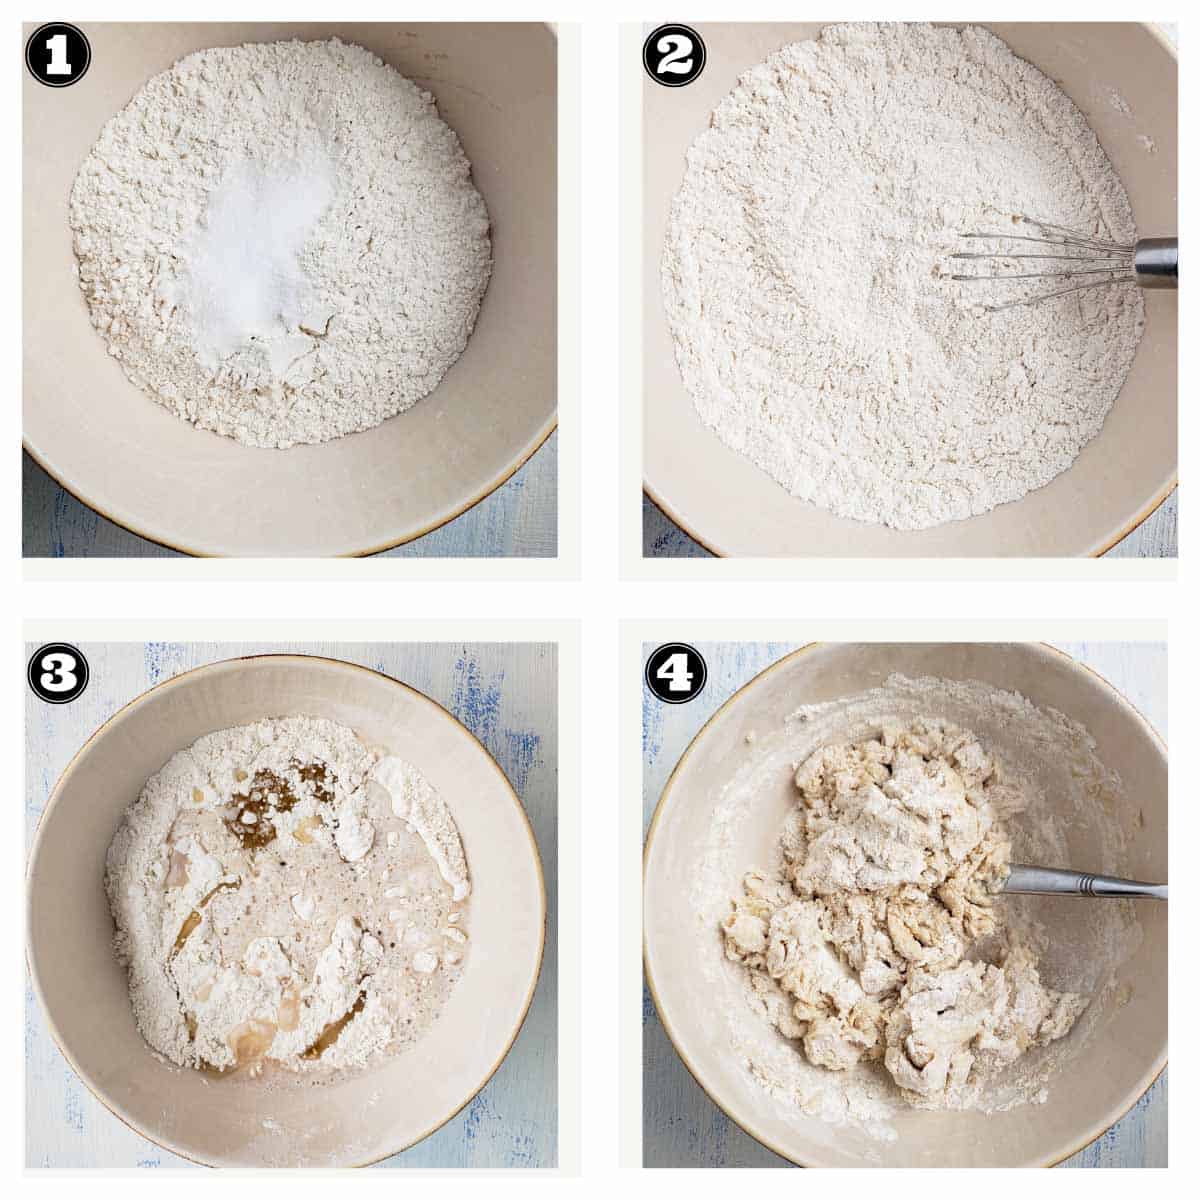 images showing combining ingredients to form a dough mass